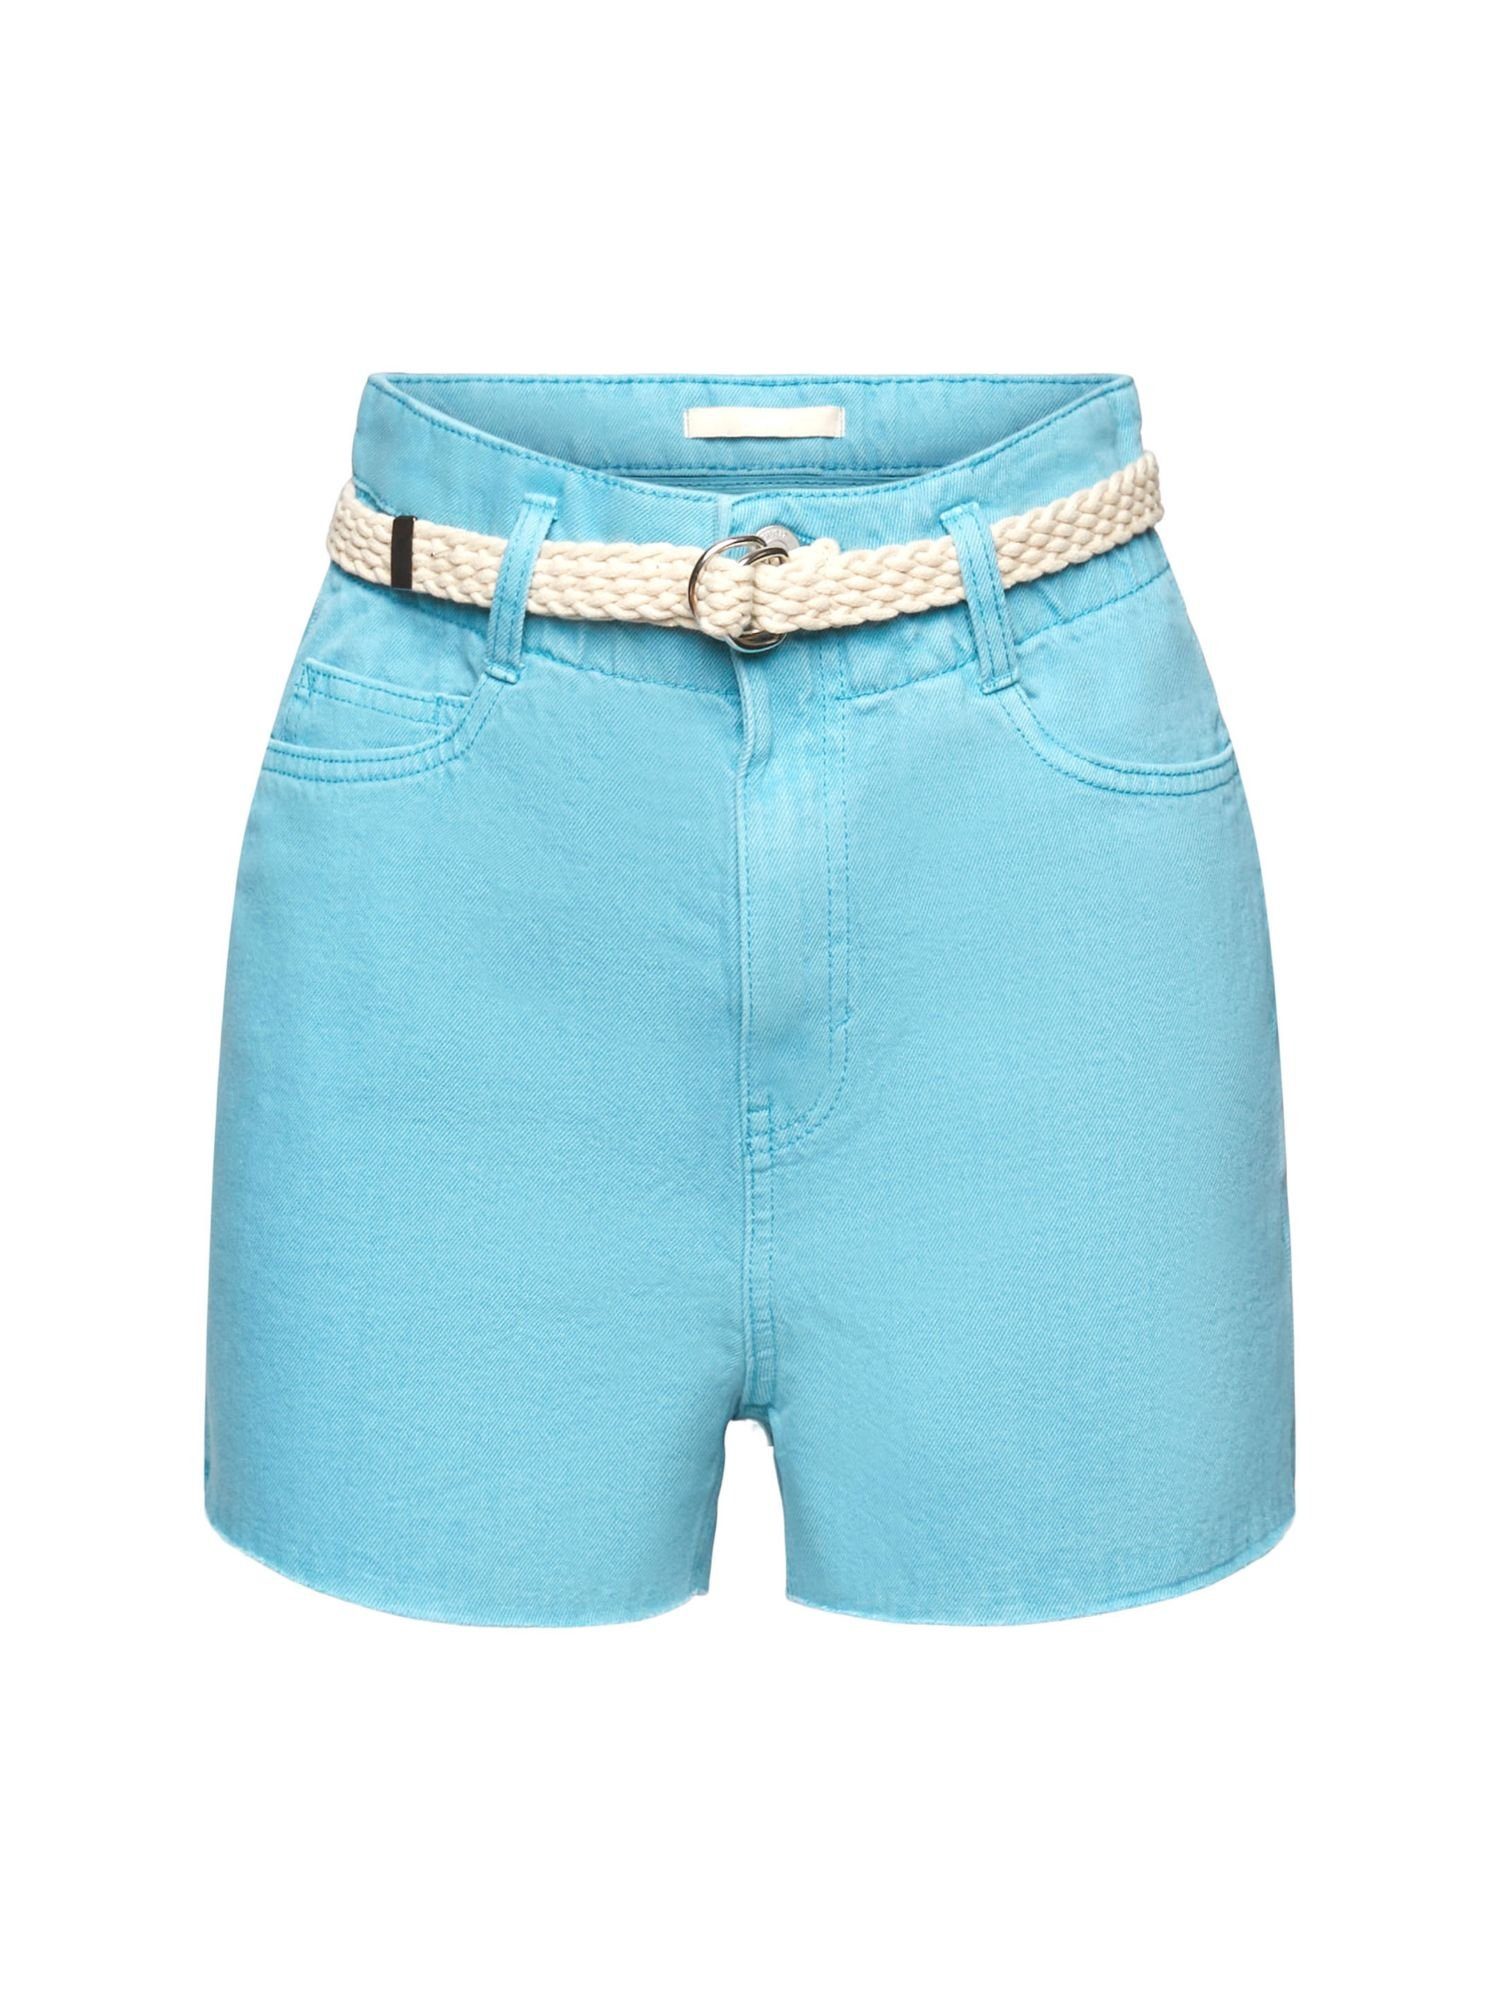 in edc Jeansshorts abgeschnittener TURQUOISE Optik by (1-tlg) Esprit Shorts